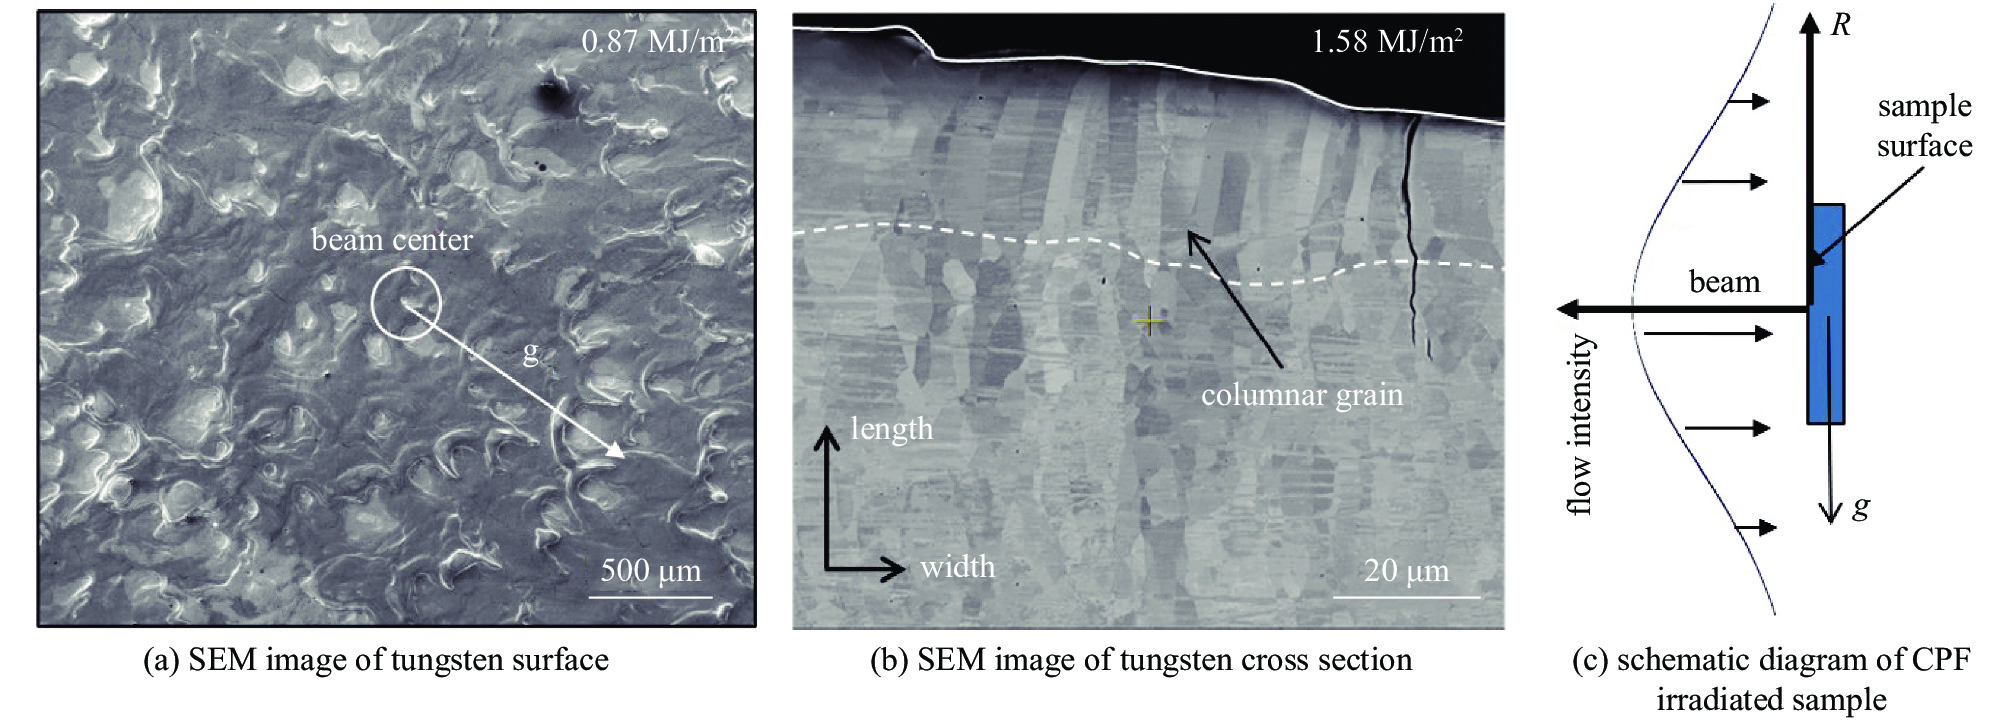 SEM images and diagram of tungsten under compressed plasma flow (CPF) single pulse irradiation with pulse width of 0.1 ms